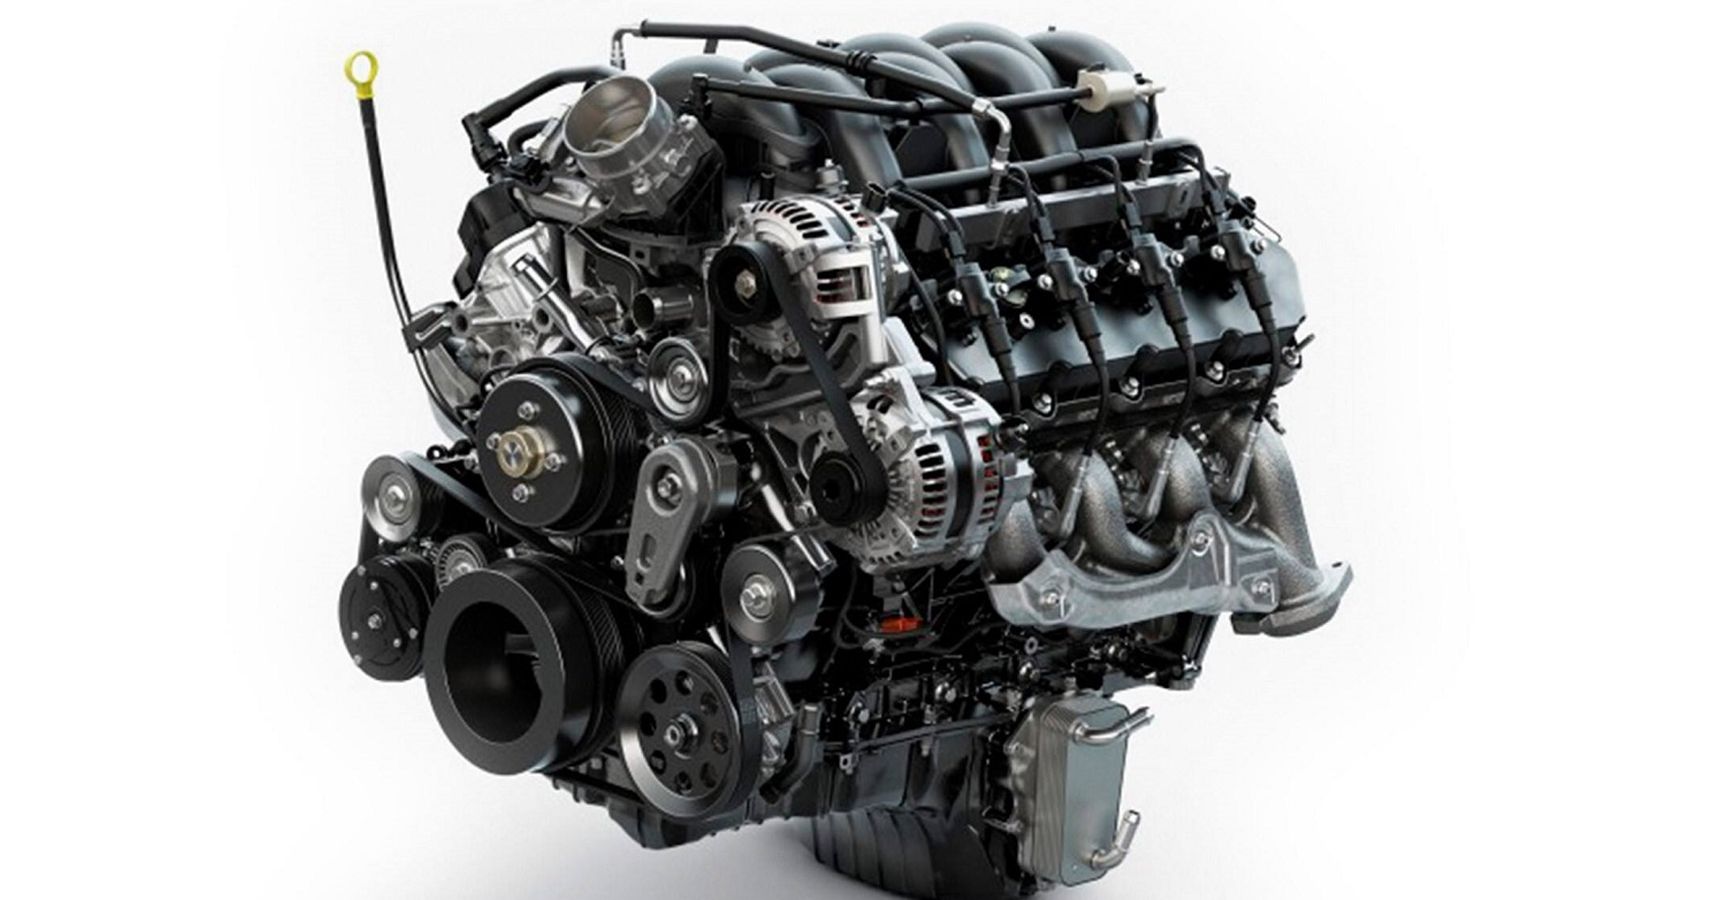 Ford TwinTurbo Godzilla V8 Engine Reportedly In The Works